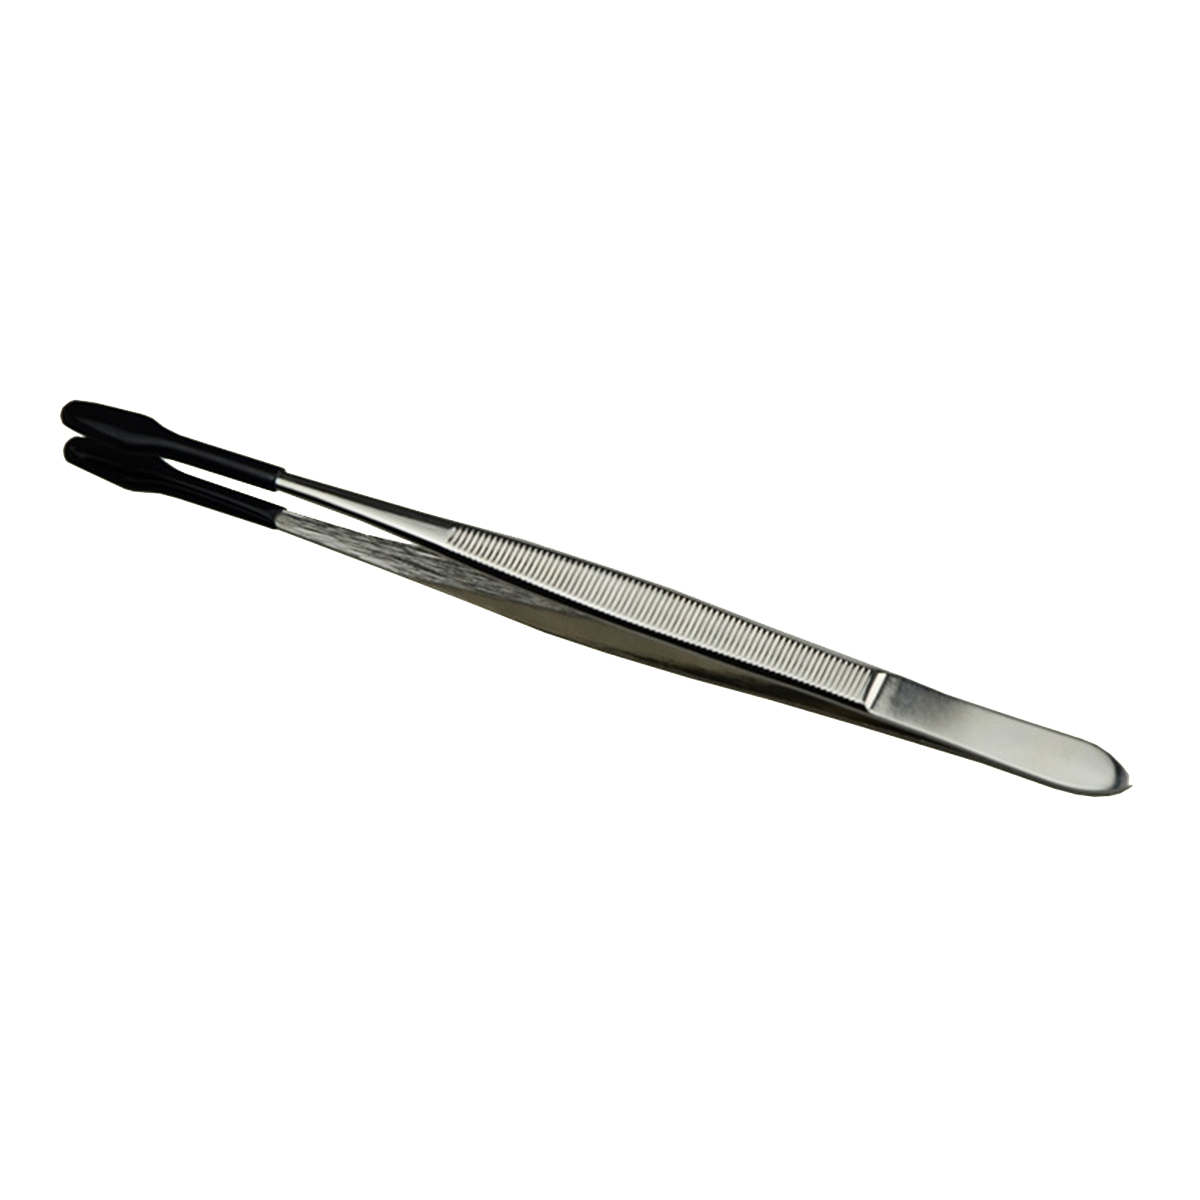 15cm Stainless Steel Tweezer for Jewelry/Coin/Stamp Collection Handling Tool 